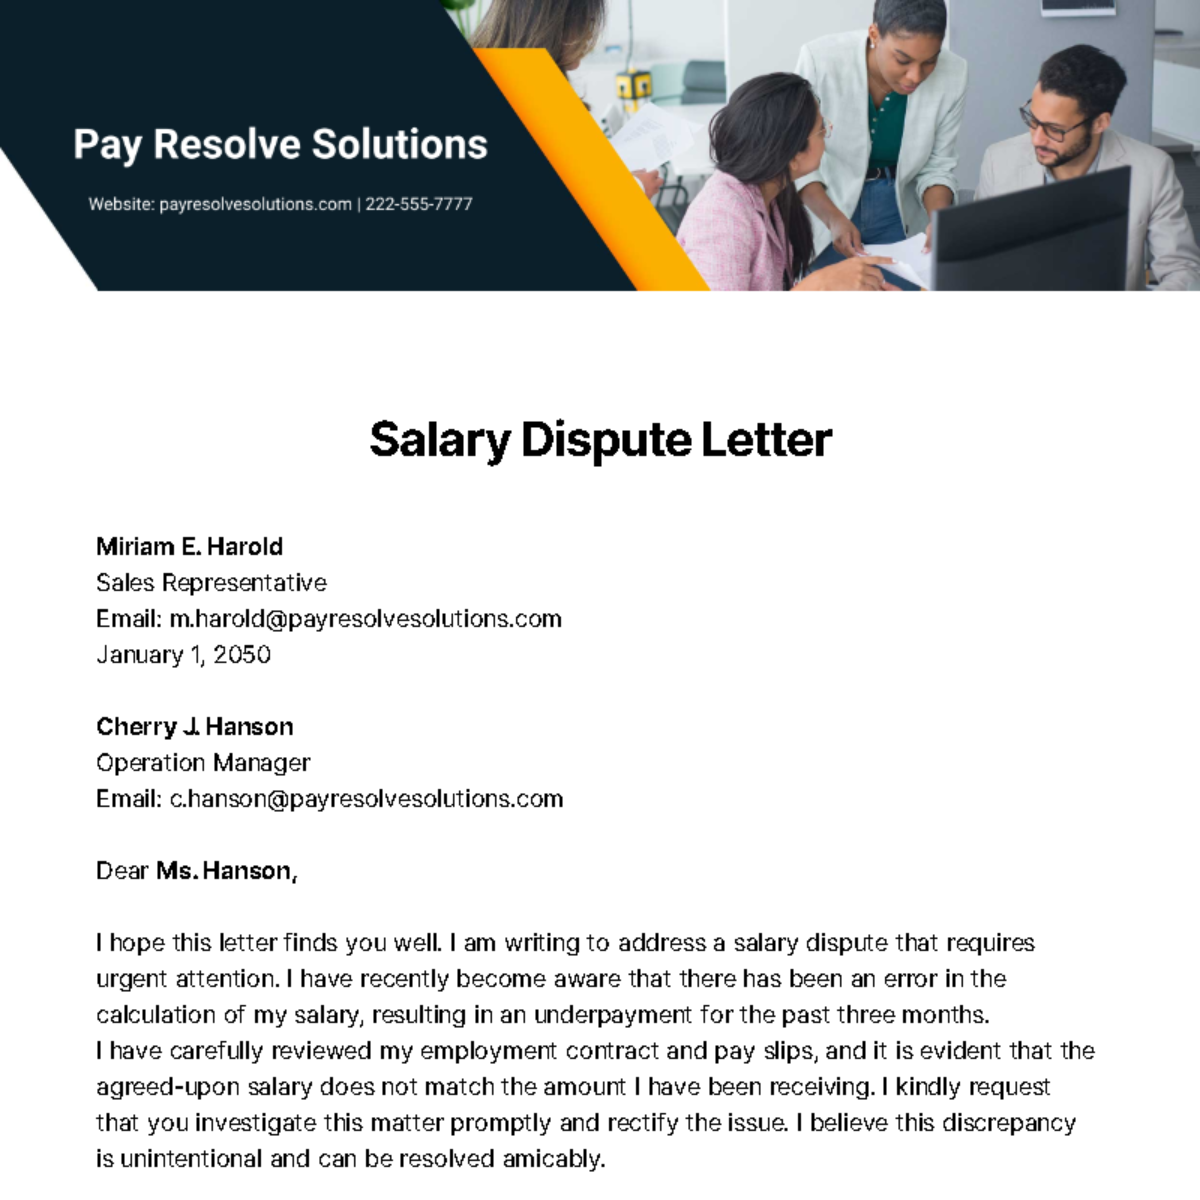 Salary Dispute Letter Template